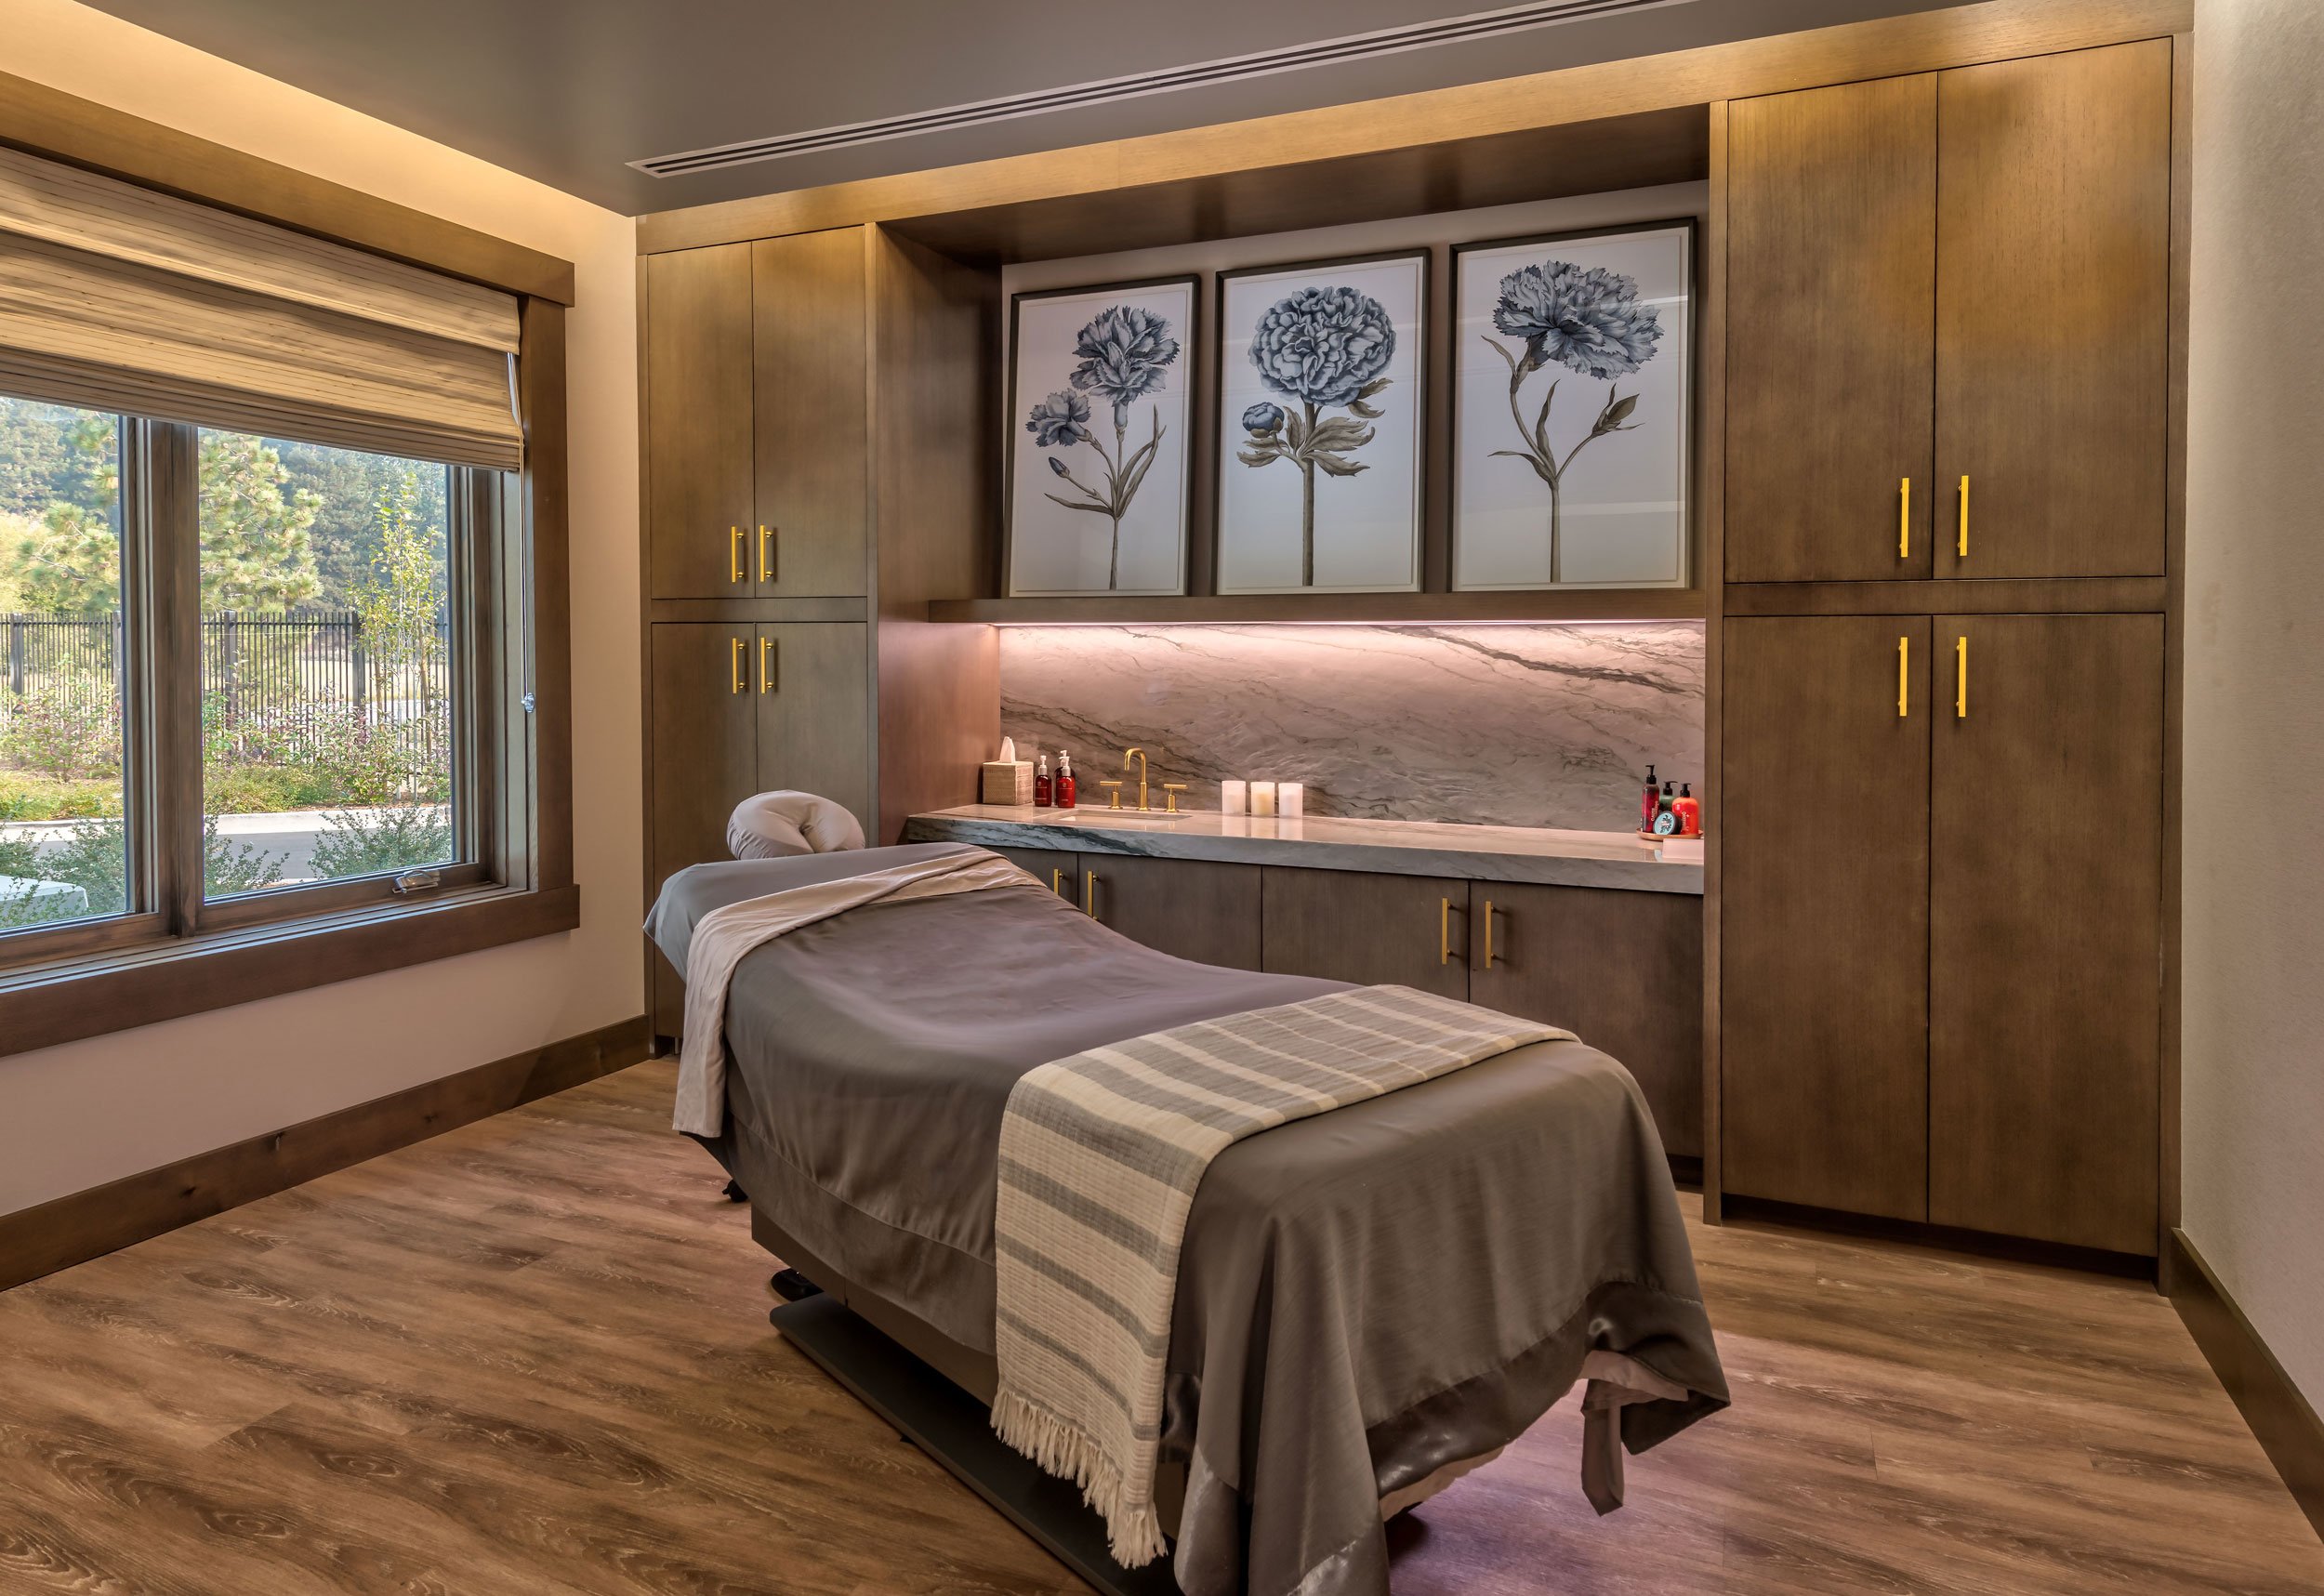 Tahoe Beach Club's spa features a tranquil massage room with a wooden floor and ample natural light from a large window.